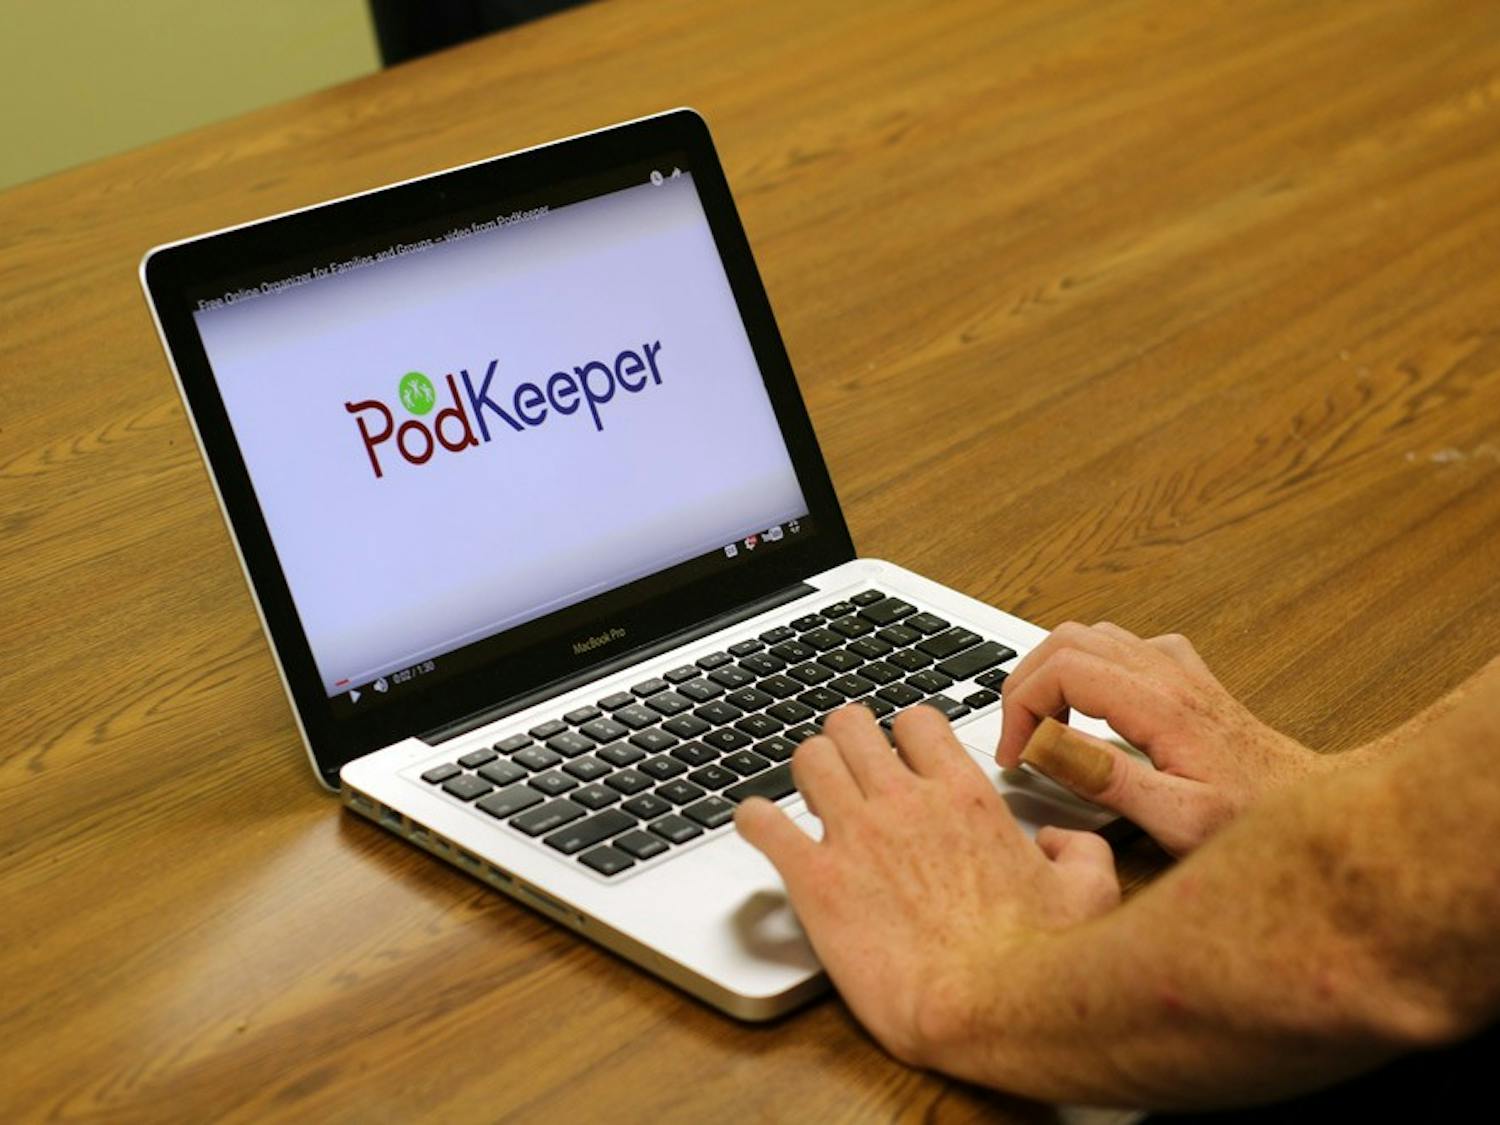 PodKeeper is an application to help parents manage family schedules and social groups for their kids but can also be used by students to manage their busy lives. It can be accessed online from a computer, tablet, iPhone or Android and syncs with calendars and emails.